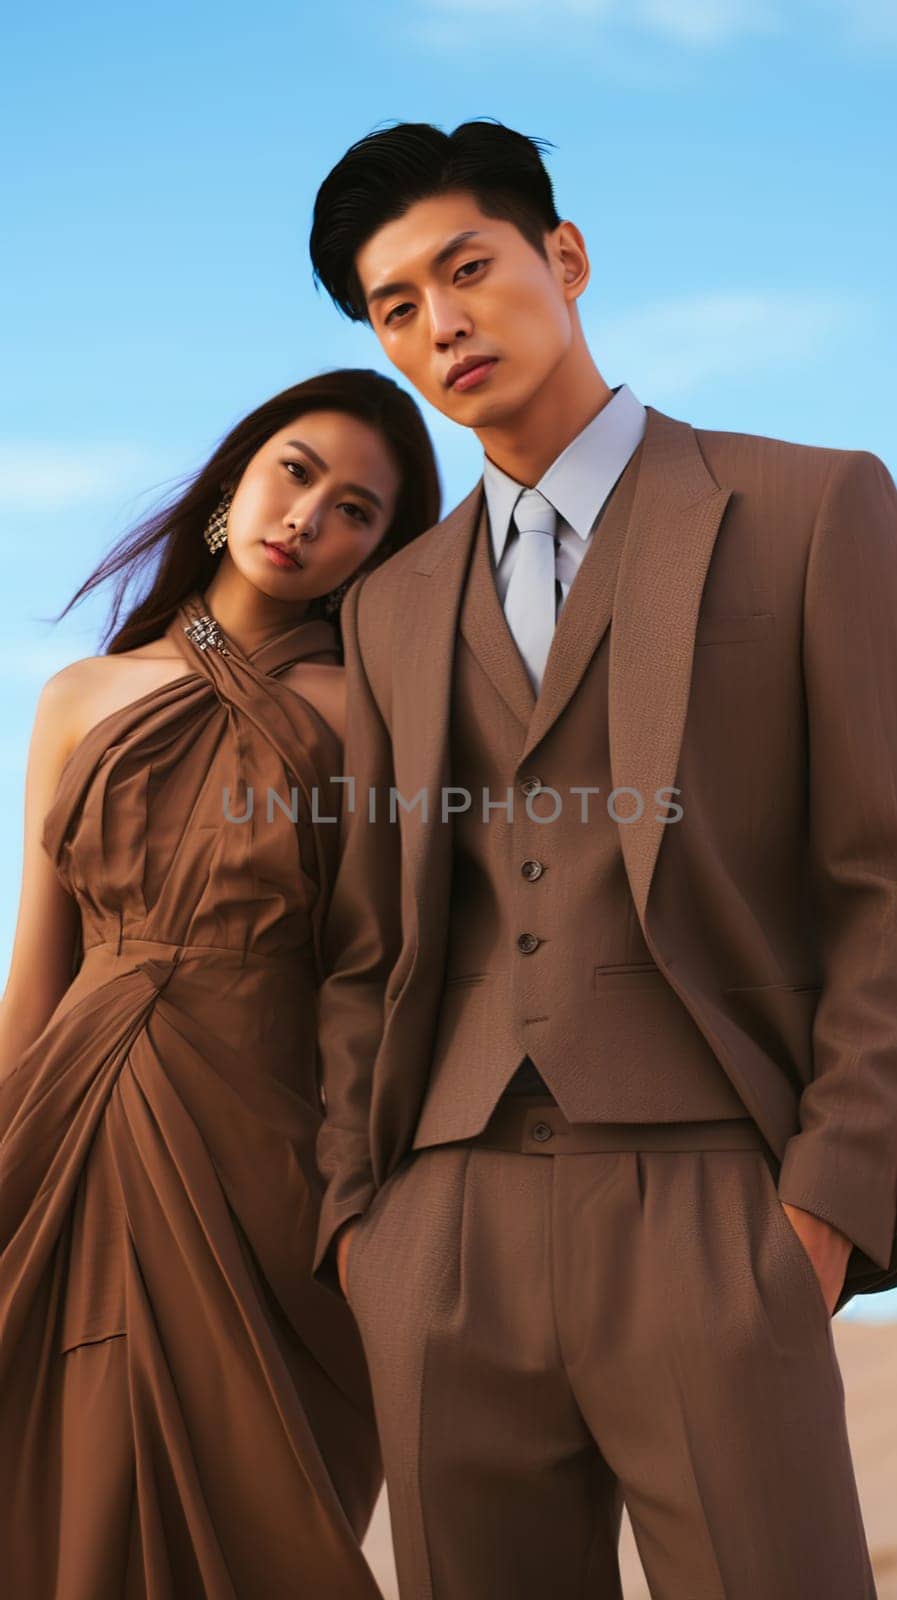 Portrait of a young Korean couple, wearing beige clothes. Model. High quality photo